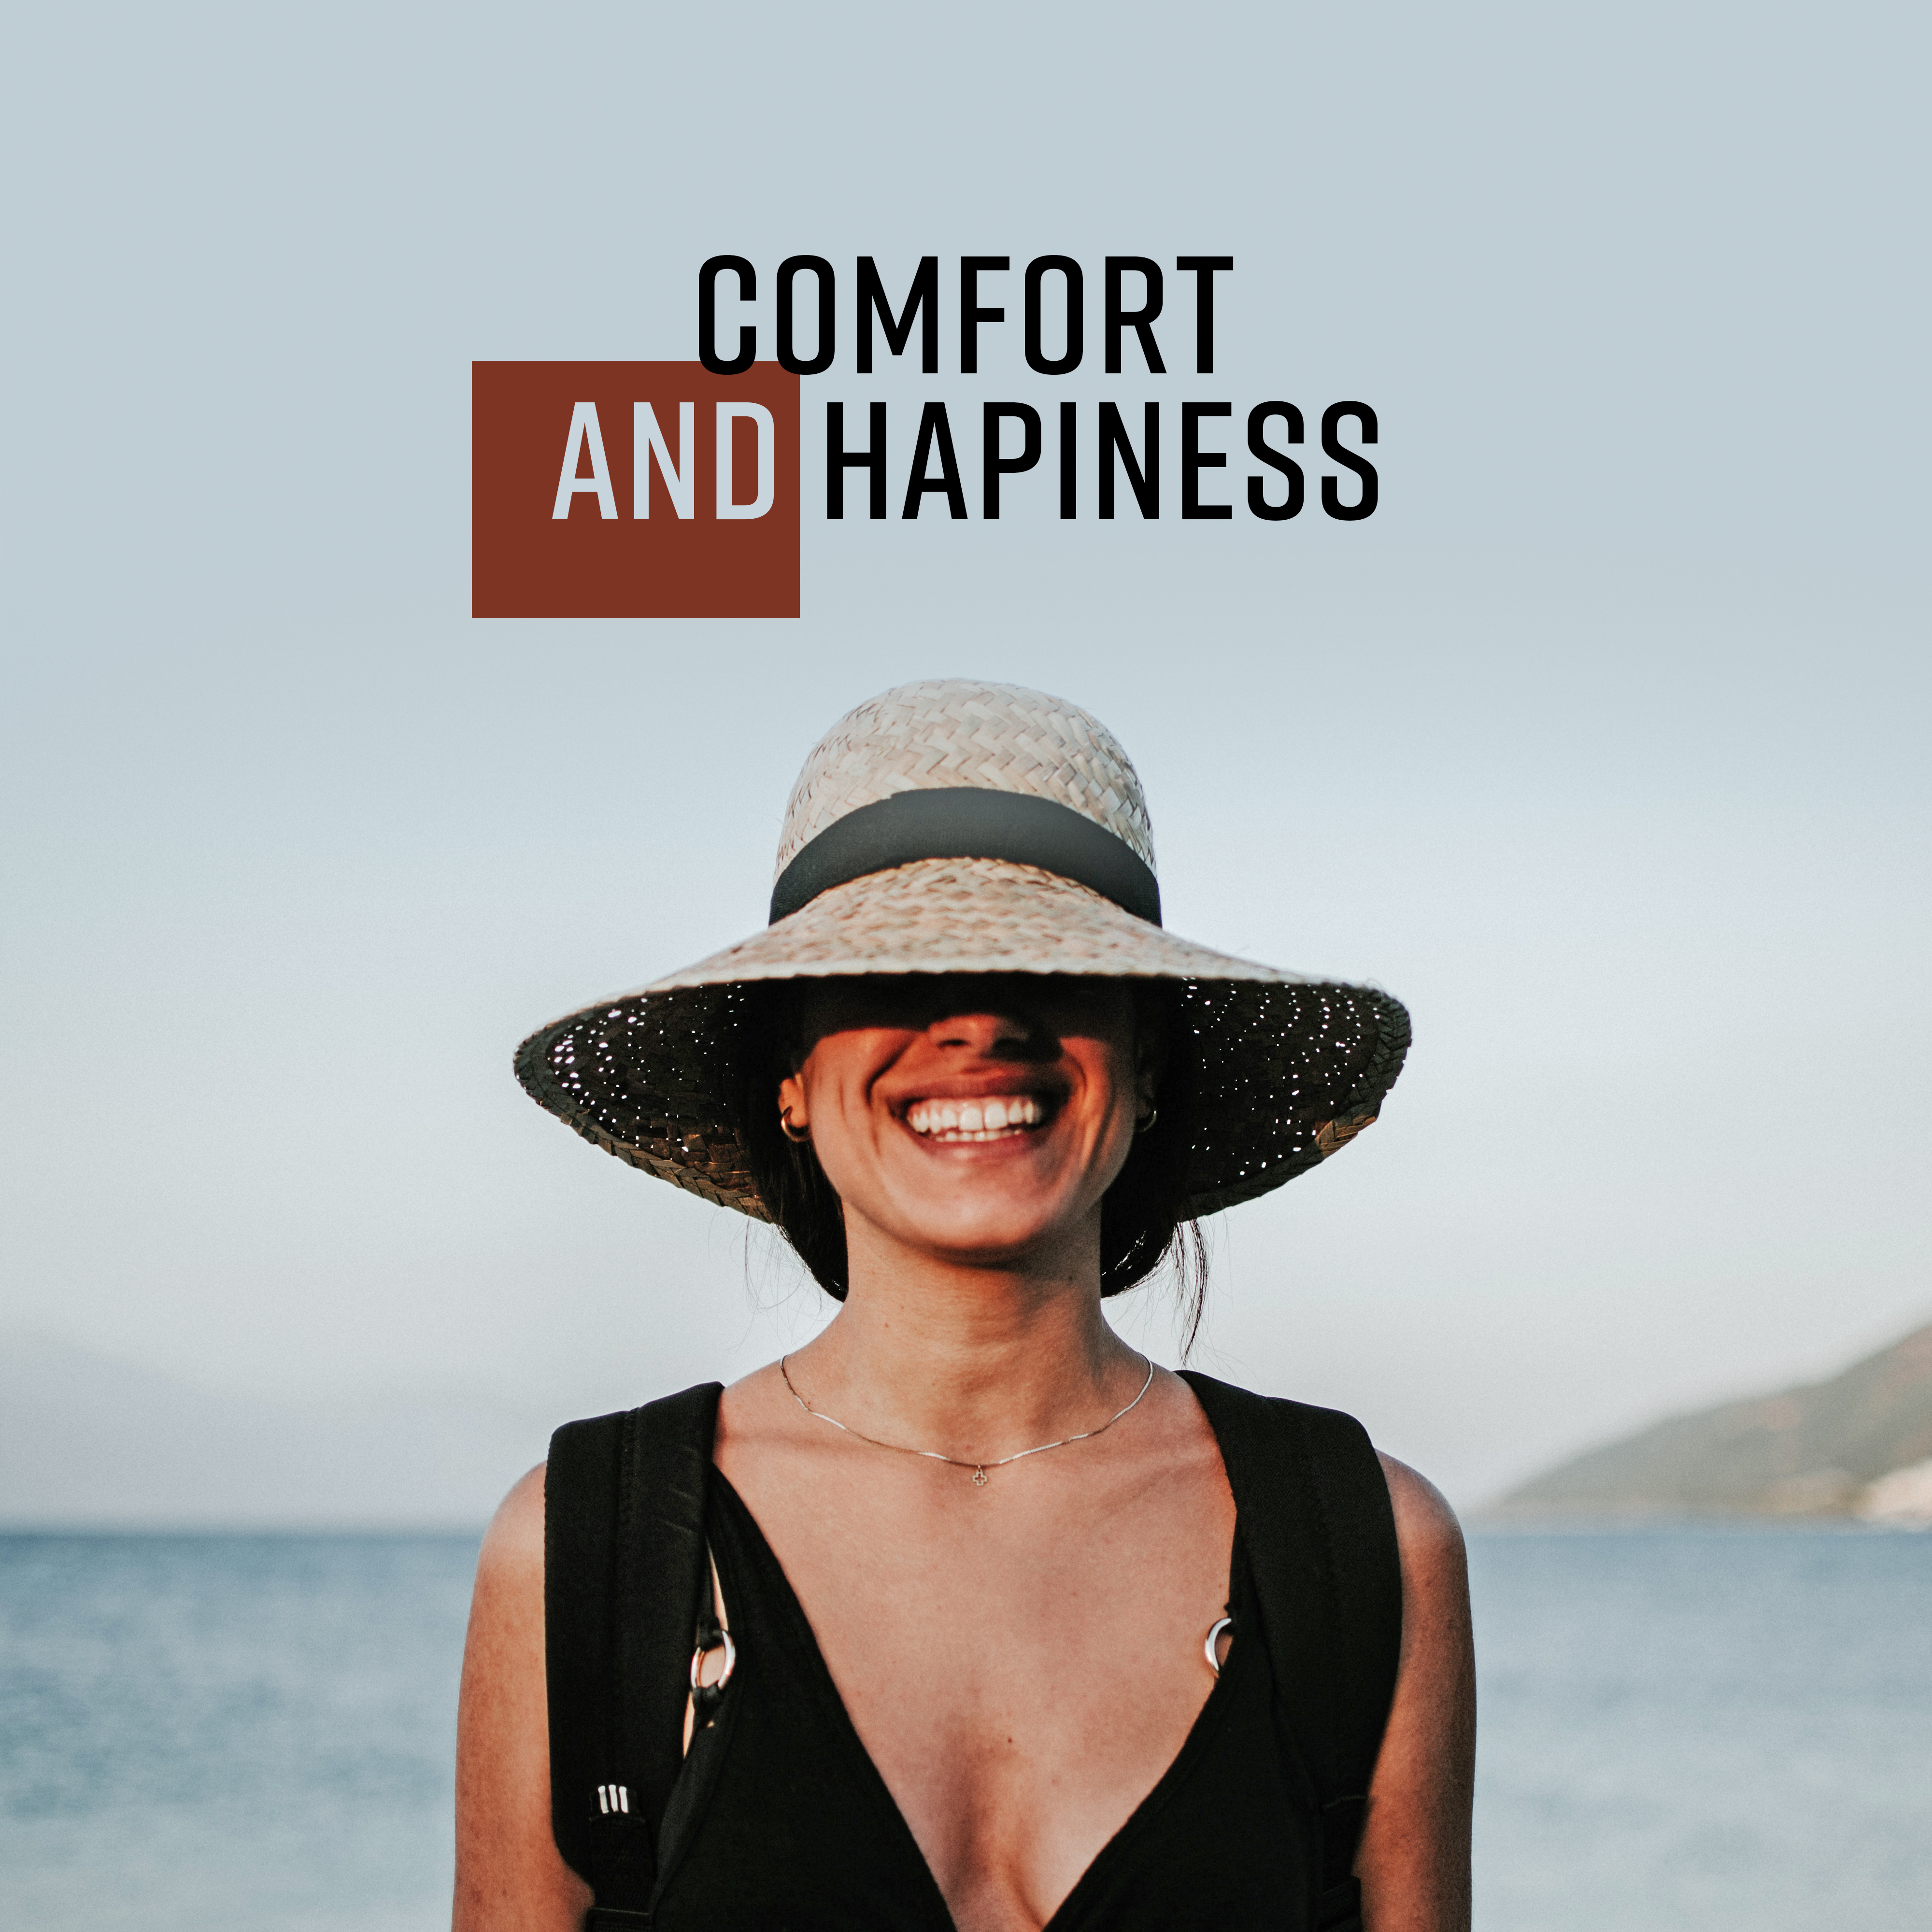 Comfort and Hapiness: Chillout Music for Moments of Rest and Relaxation, a Break from Work, Relax and De-stressing